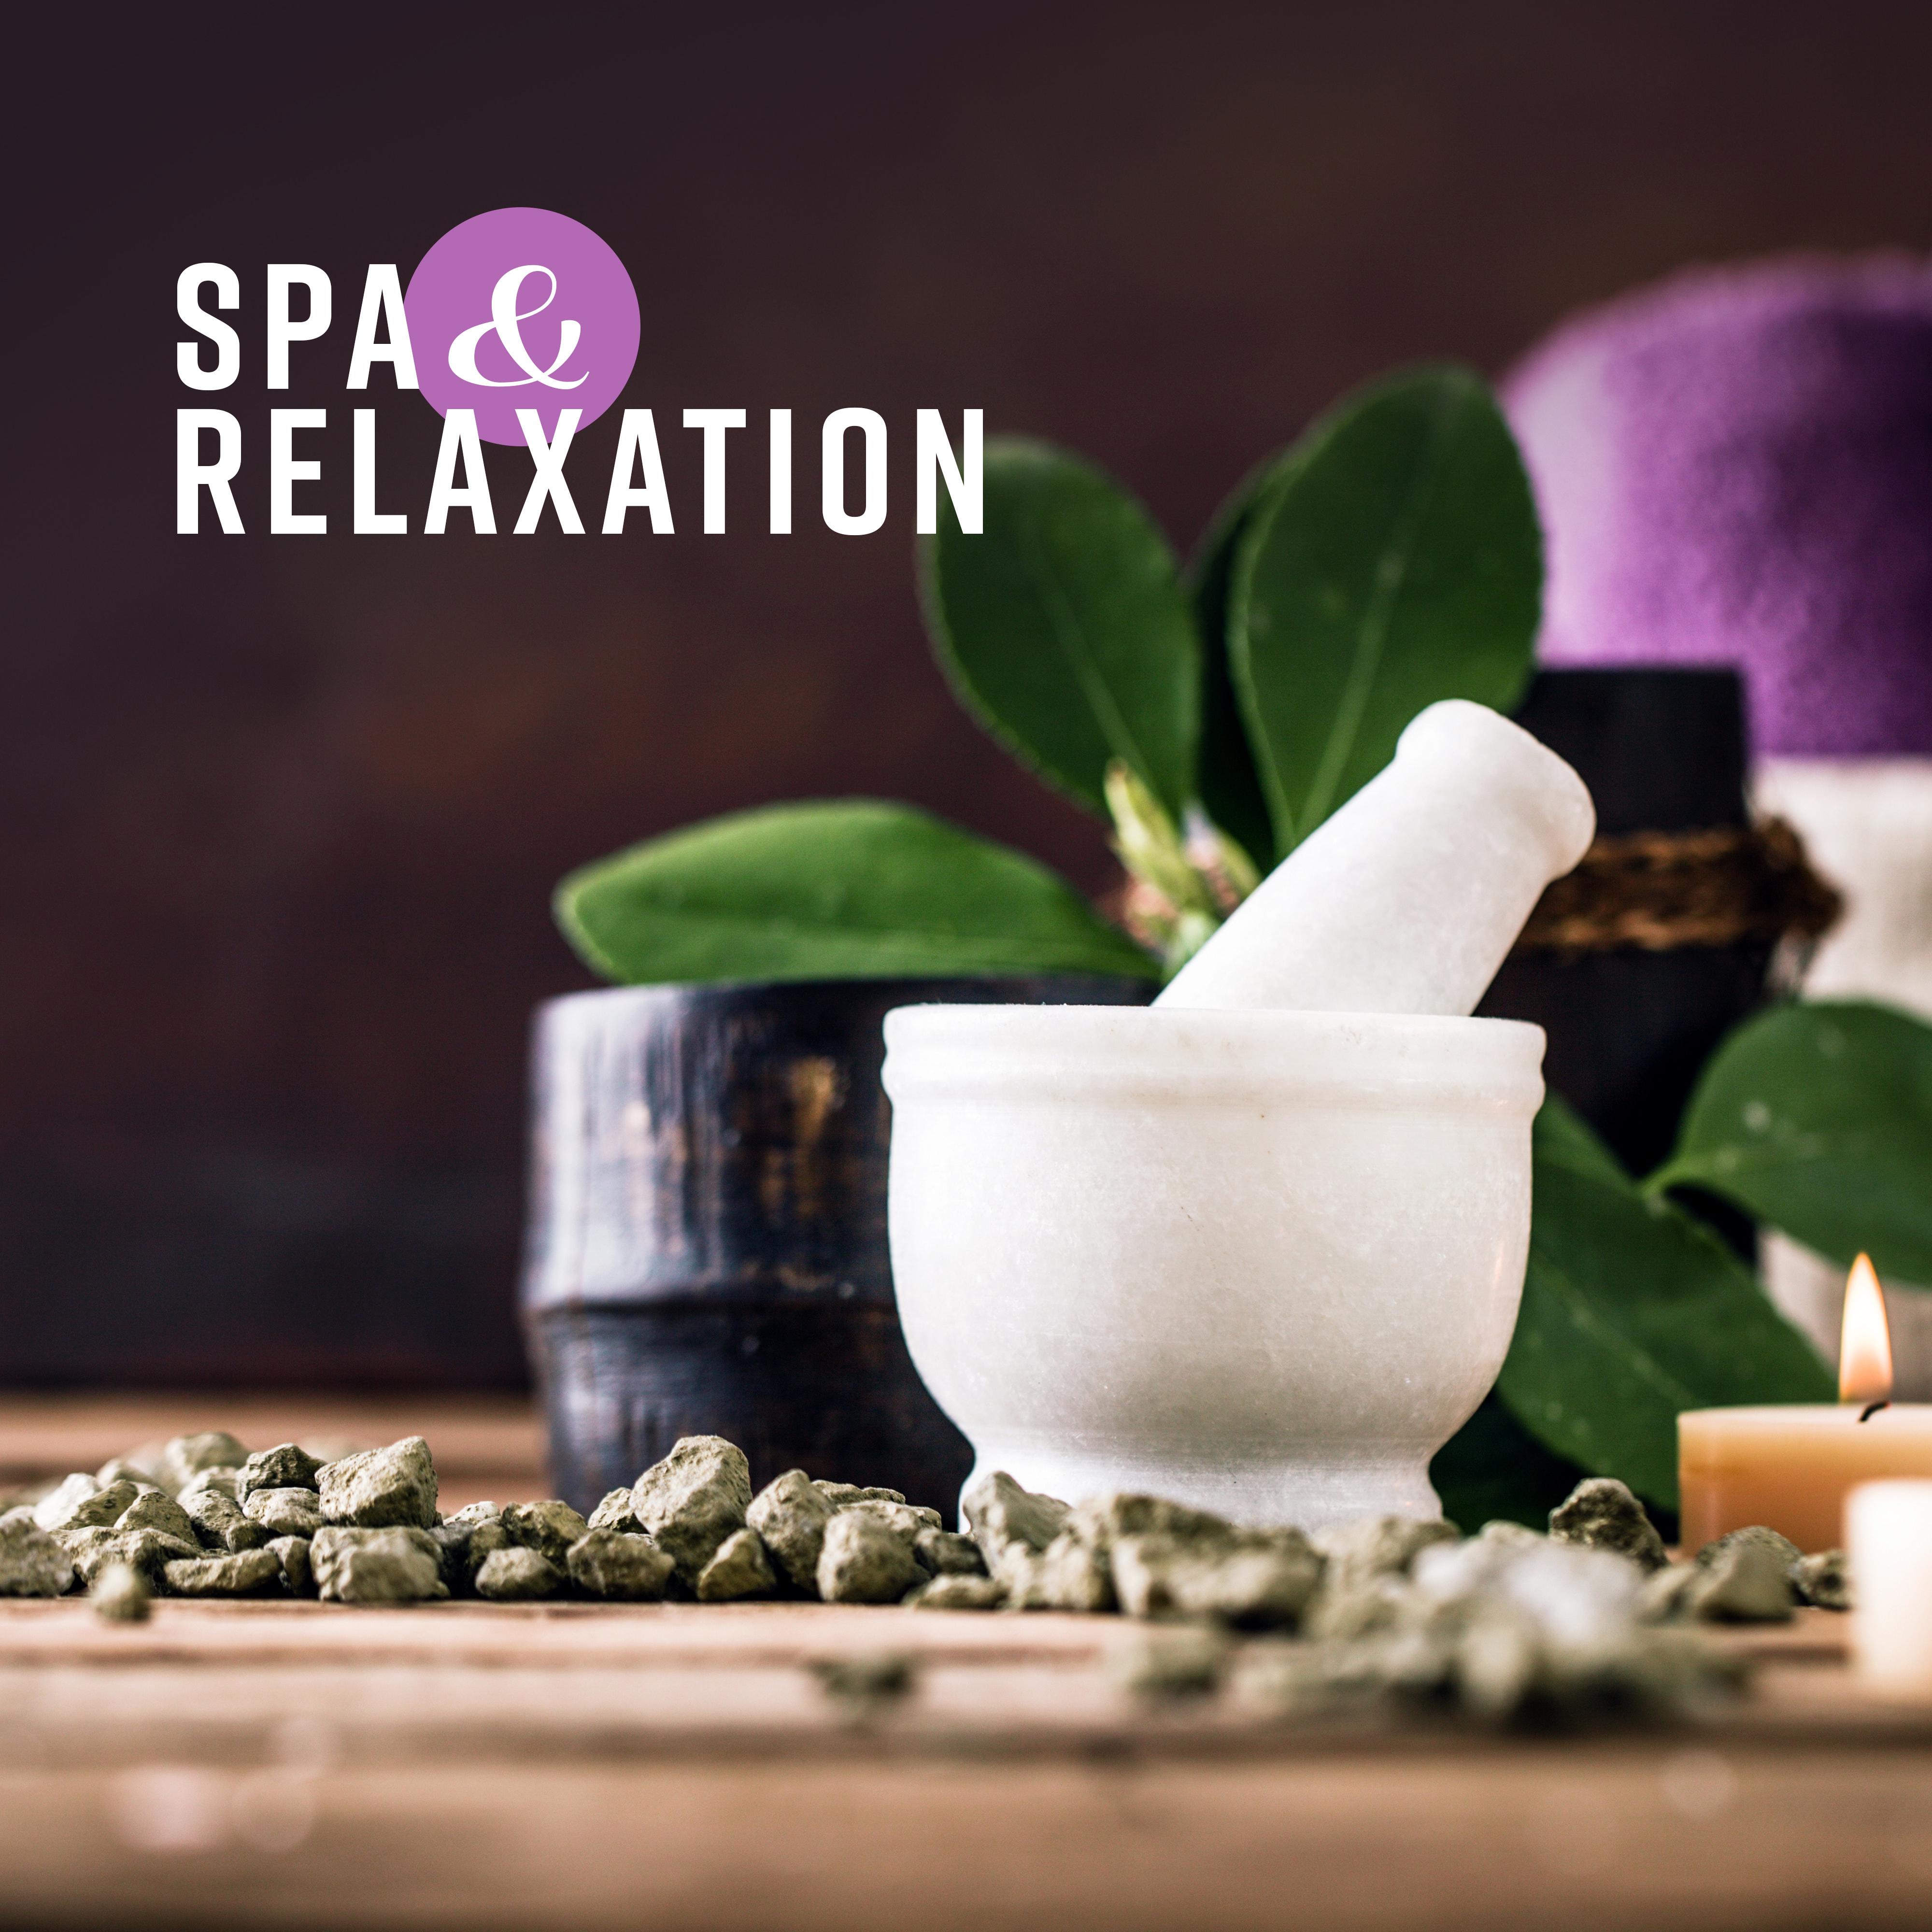 Spa & Relaxation